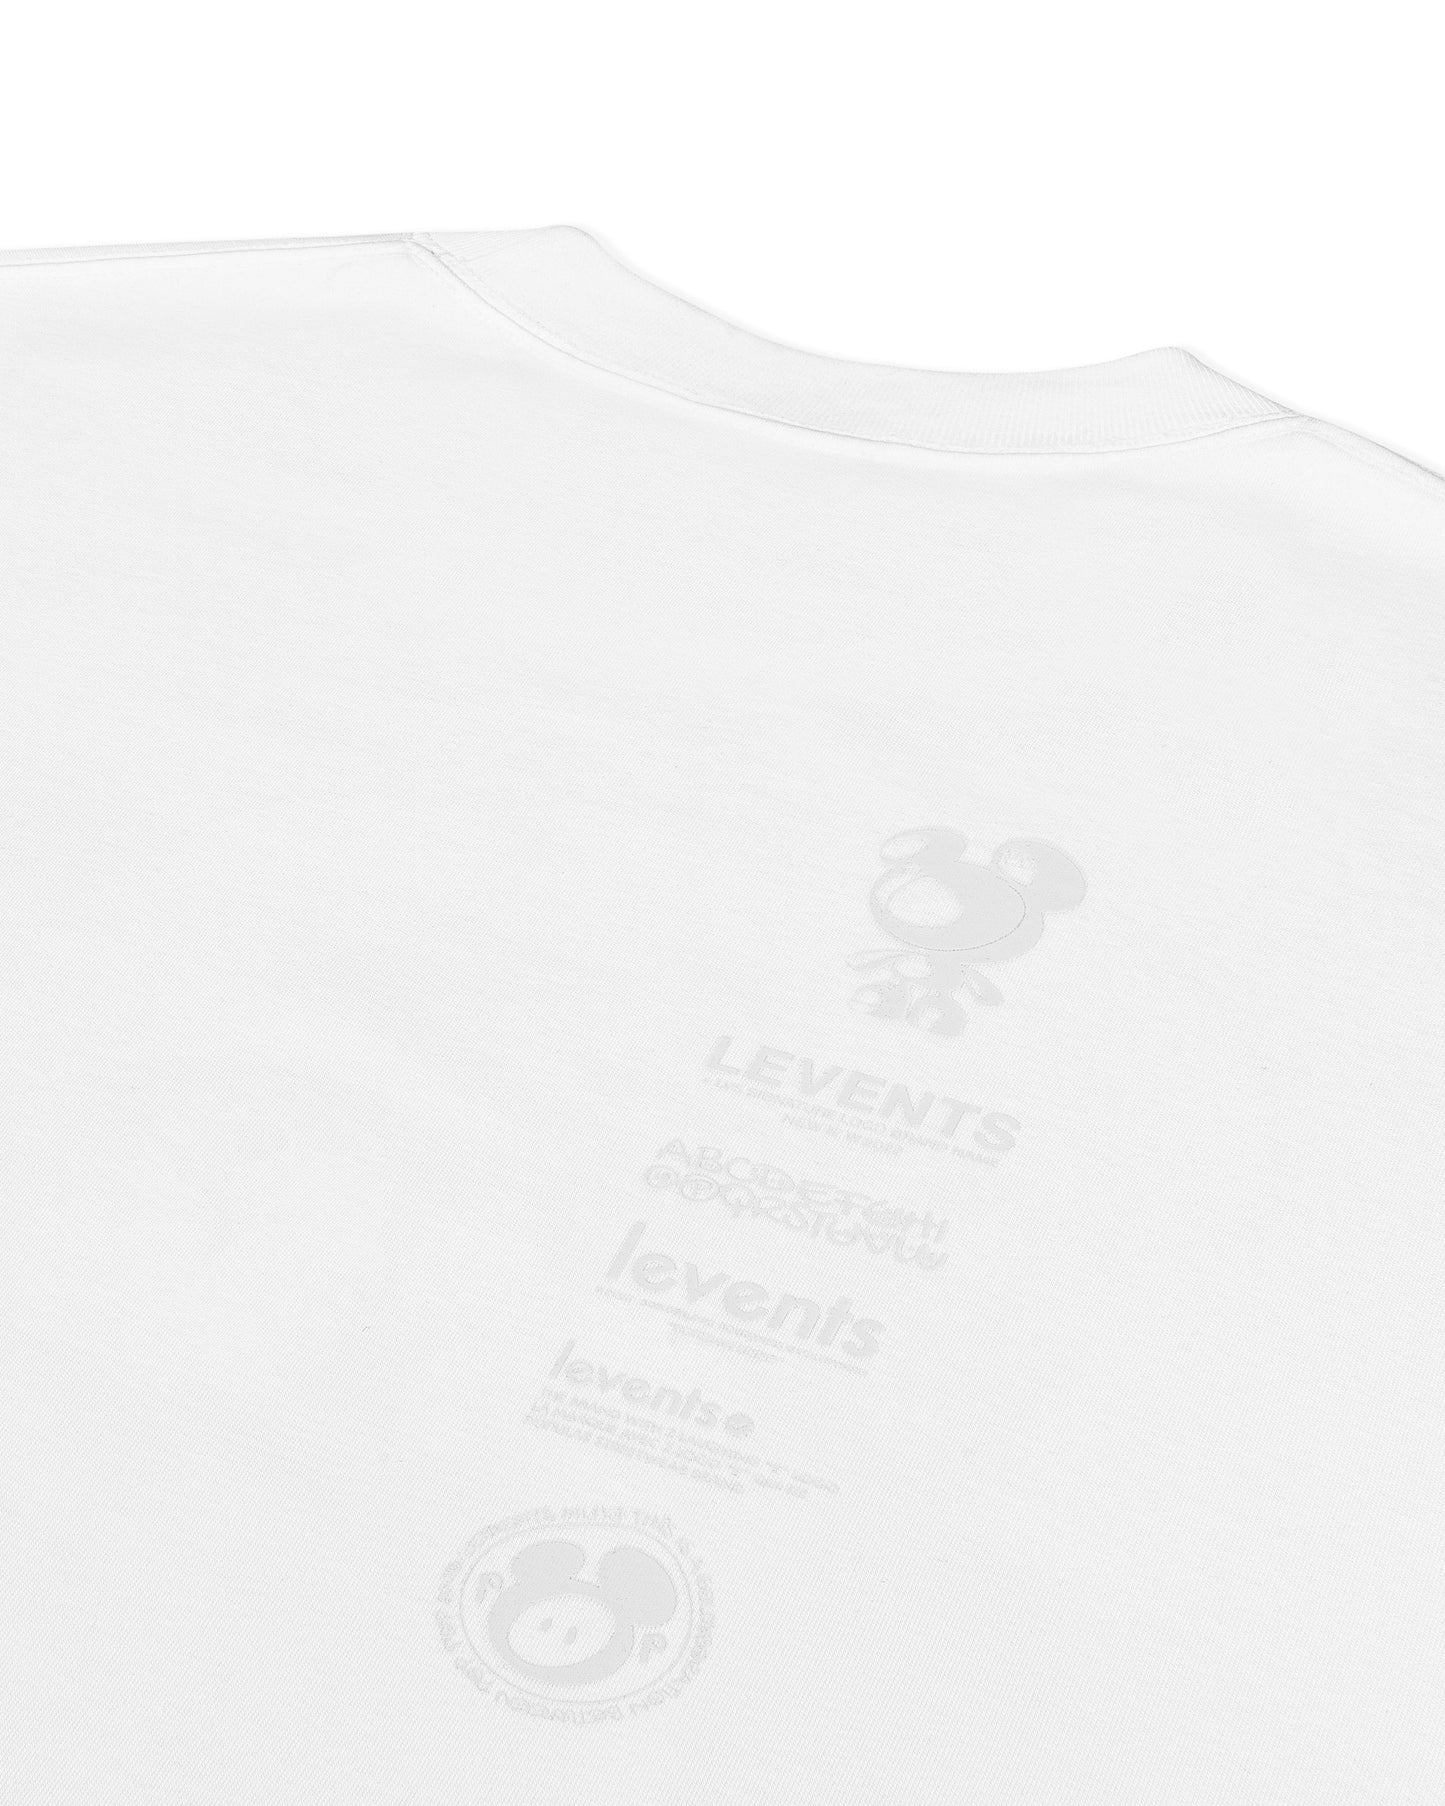 Levents® | Poppop Chat Tee/ White